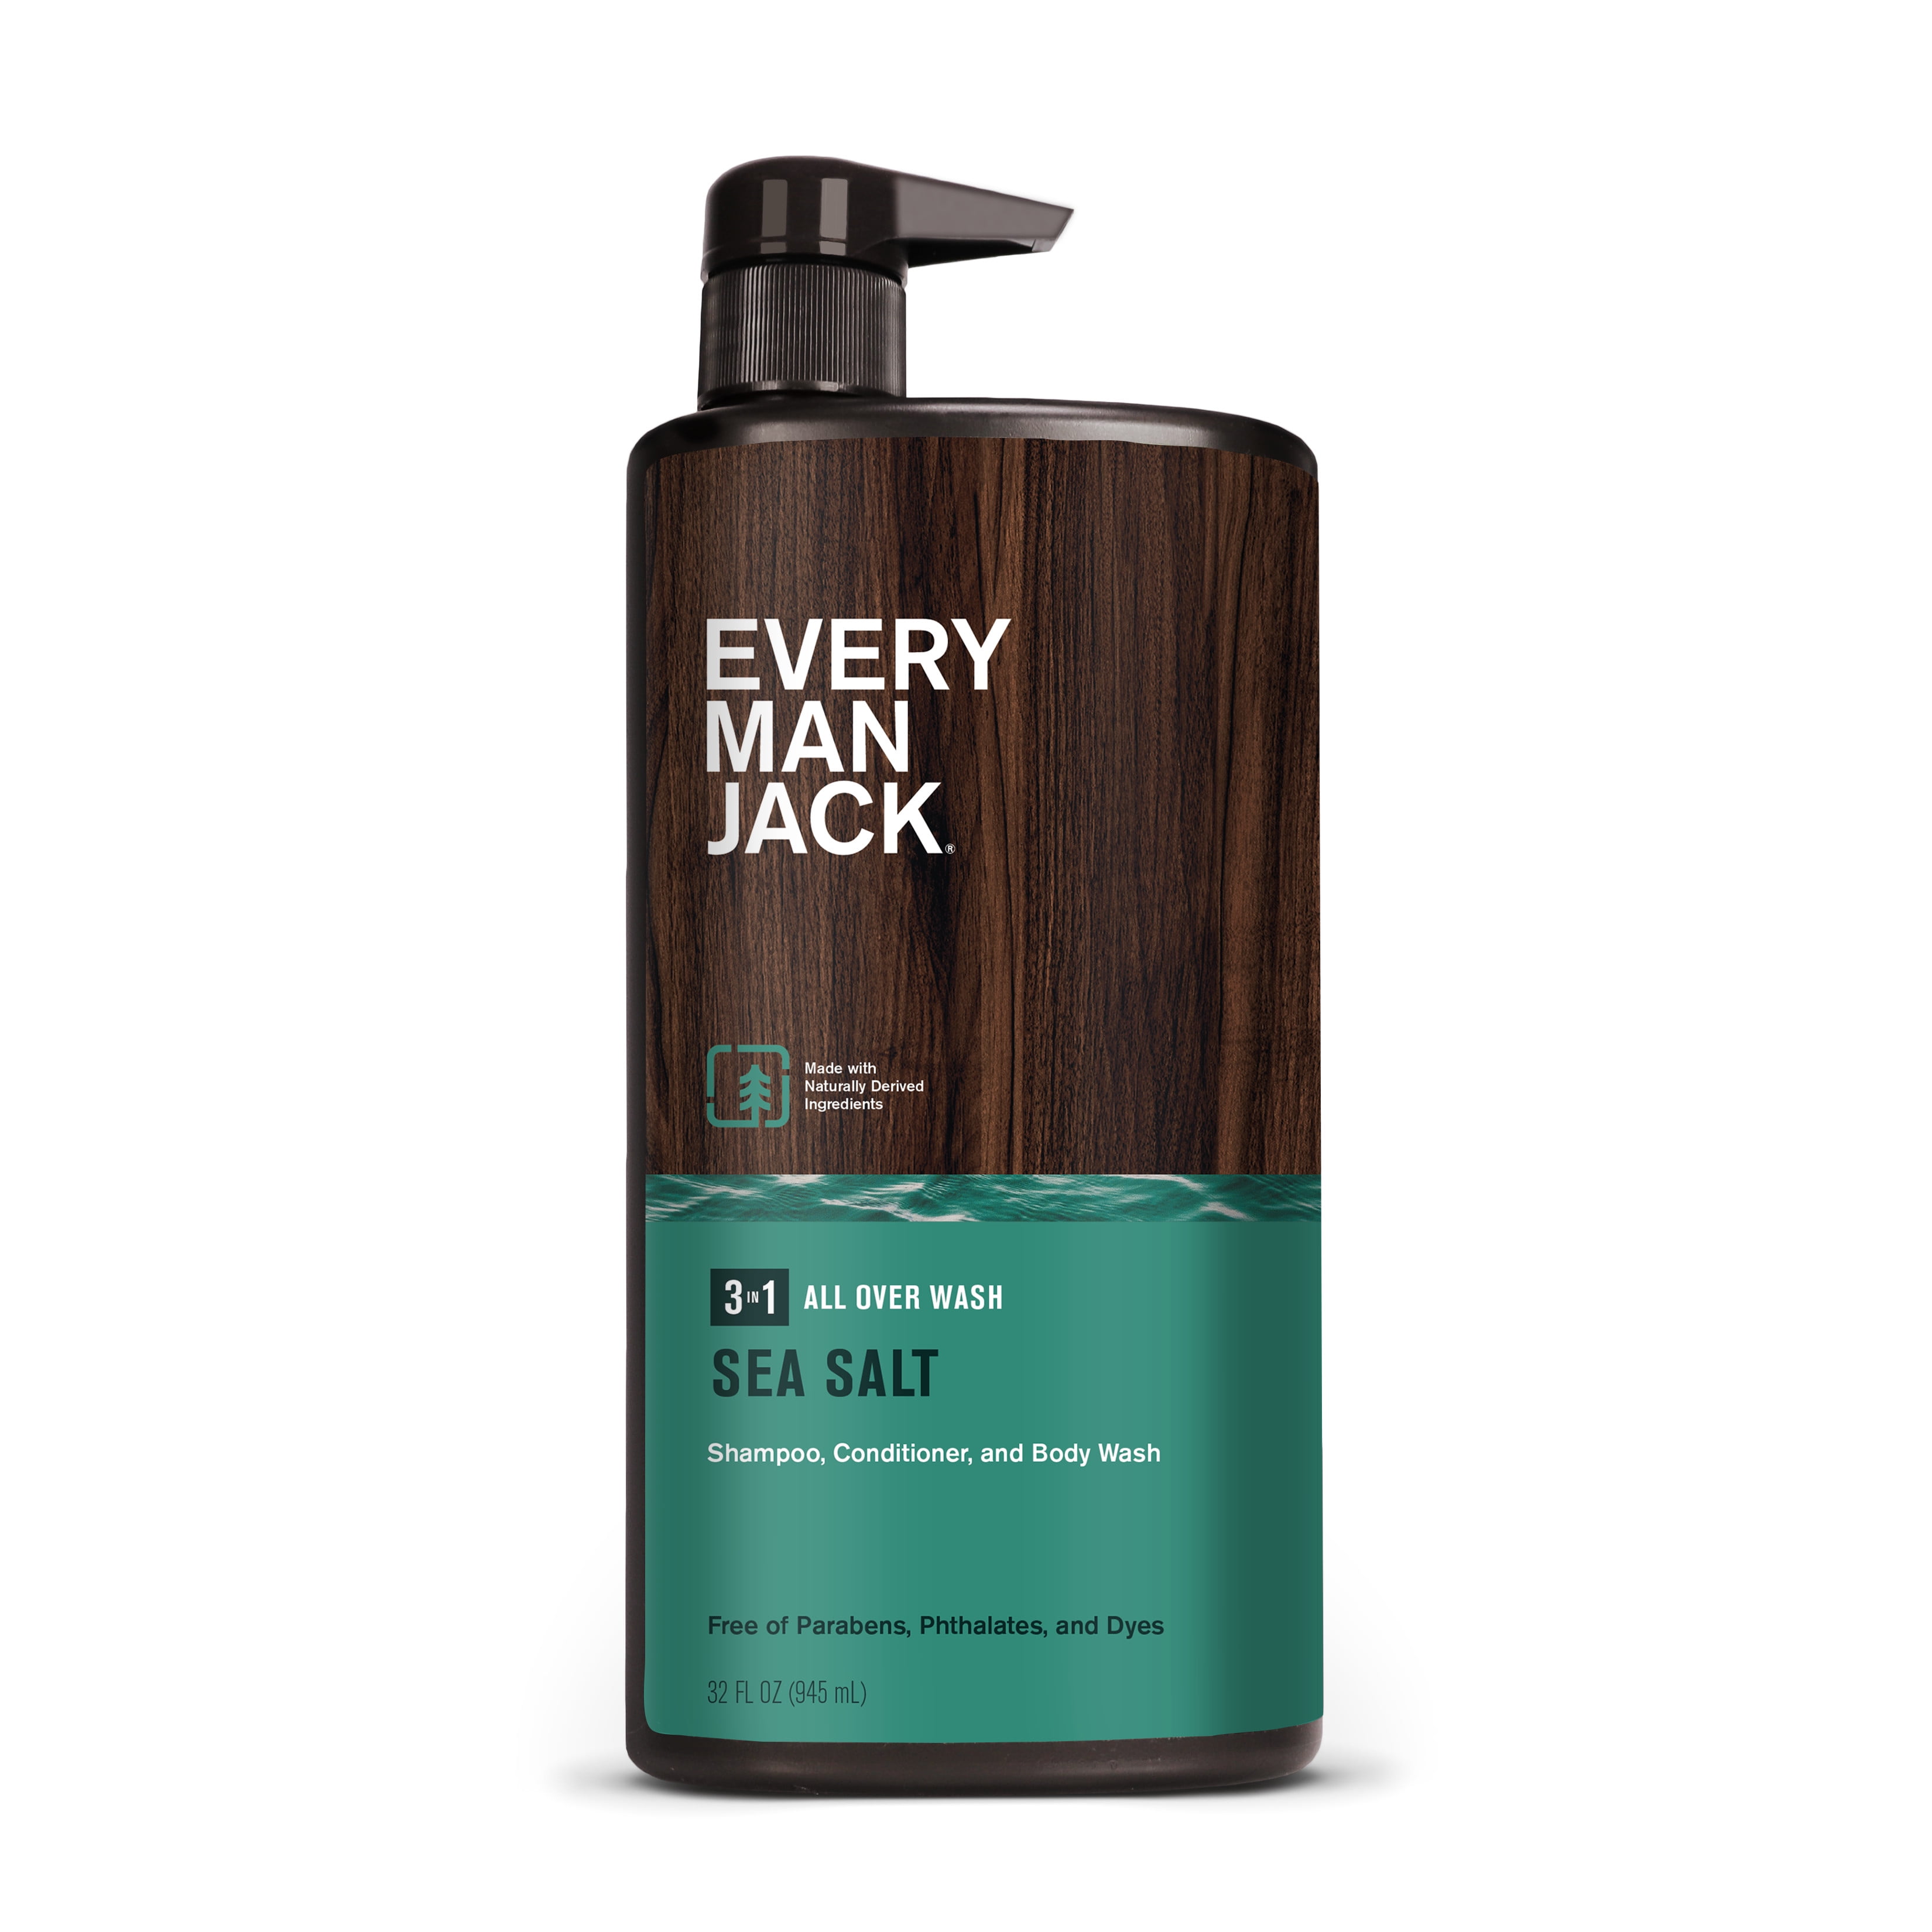 Every Man Jack Hydrating Sea Salt 3-in-1 All Over Wash for Men, Naturally Derived, 32 oz